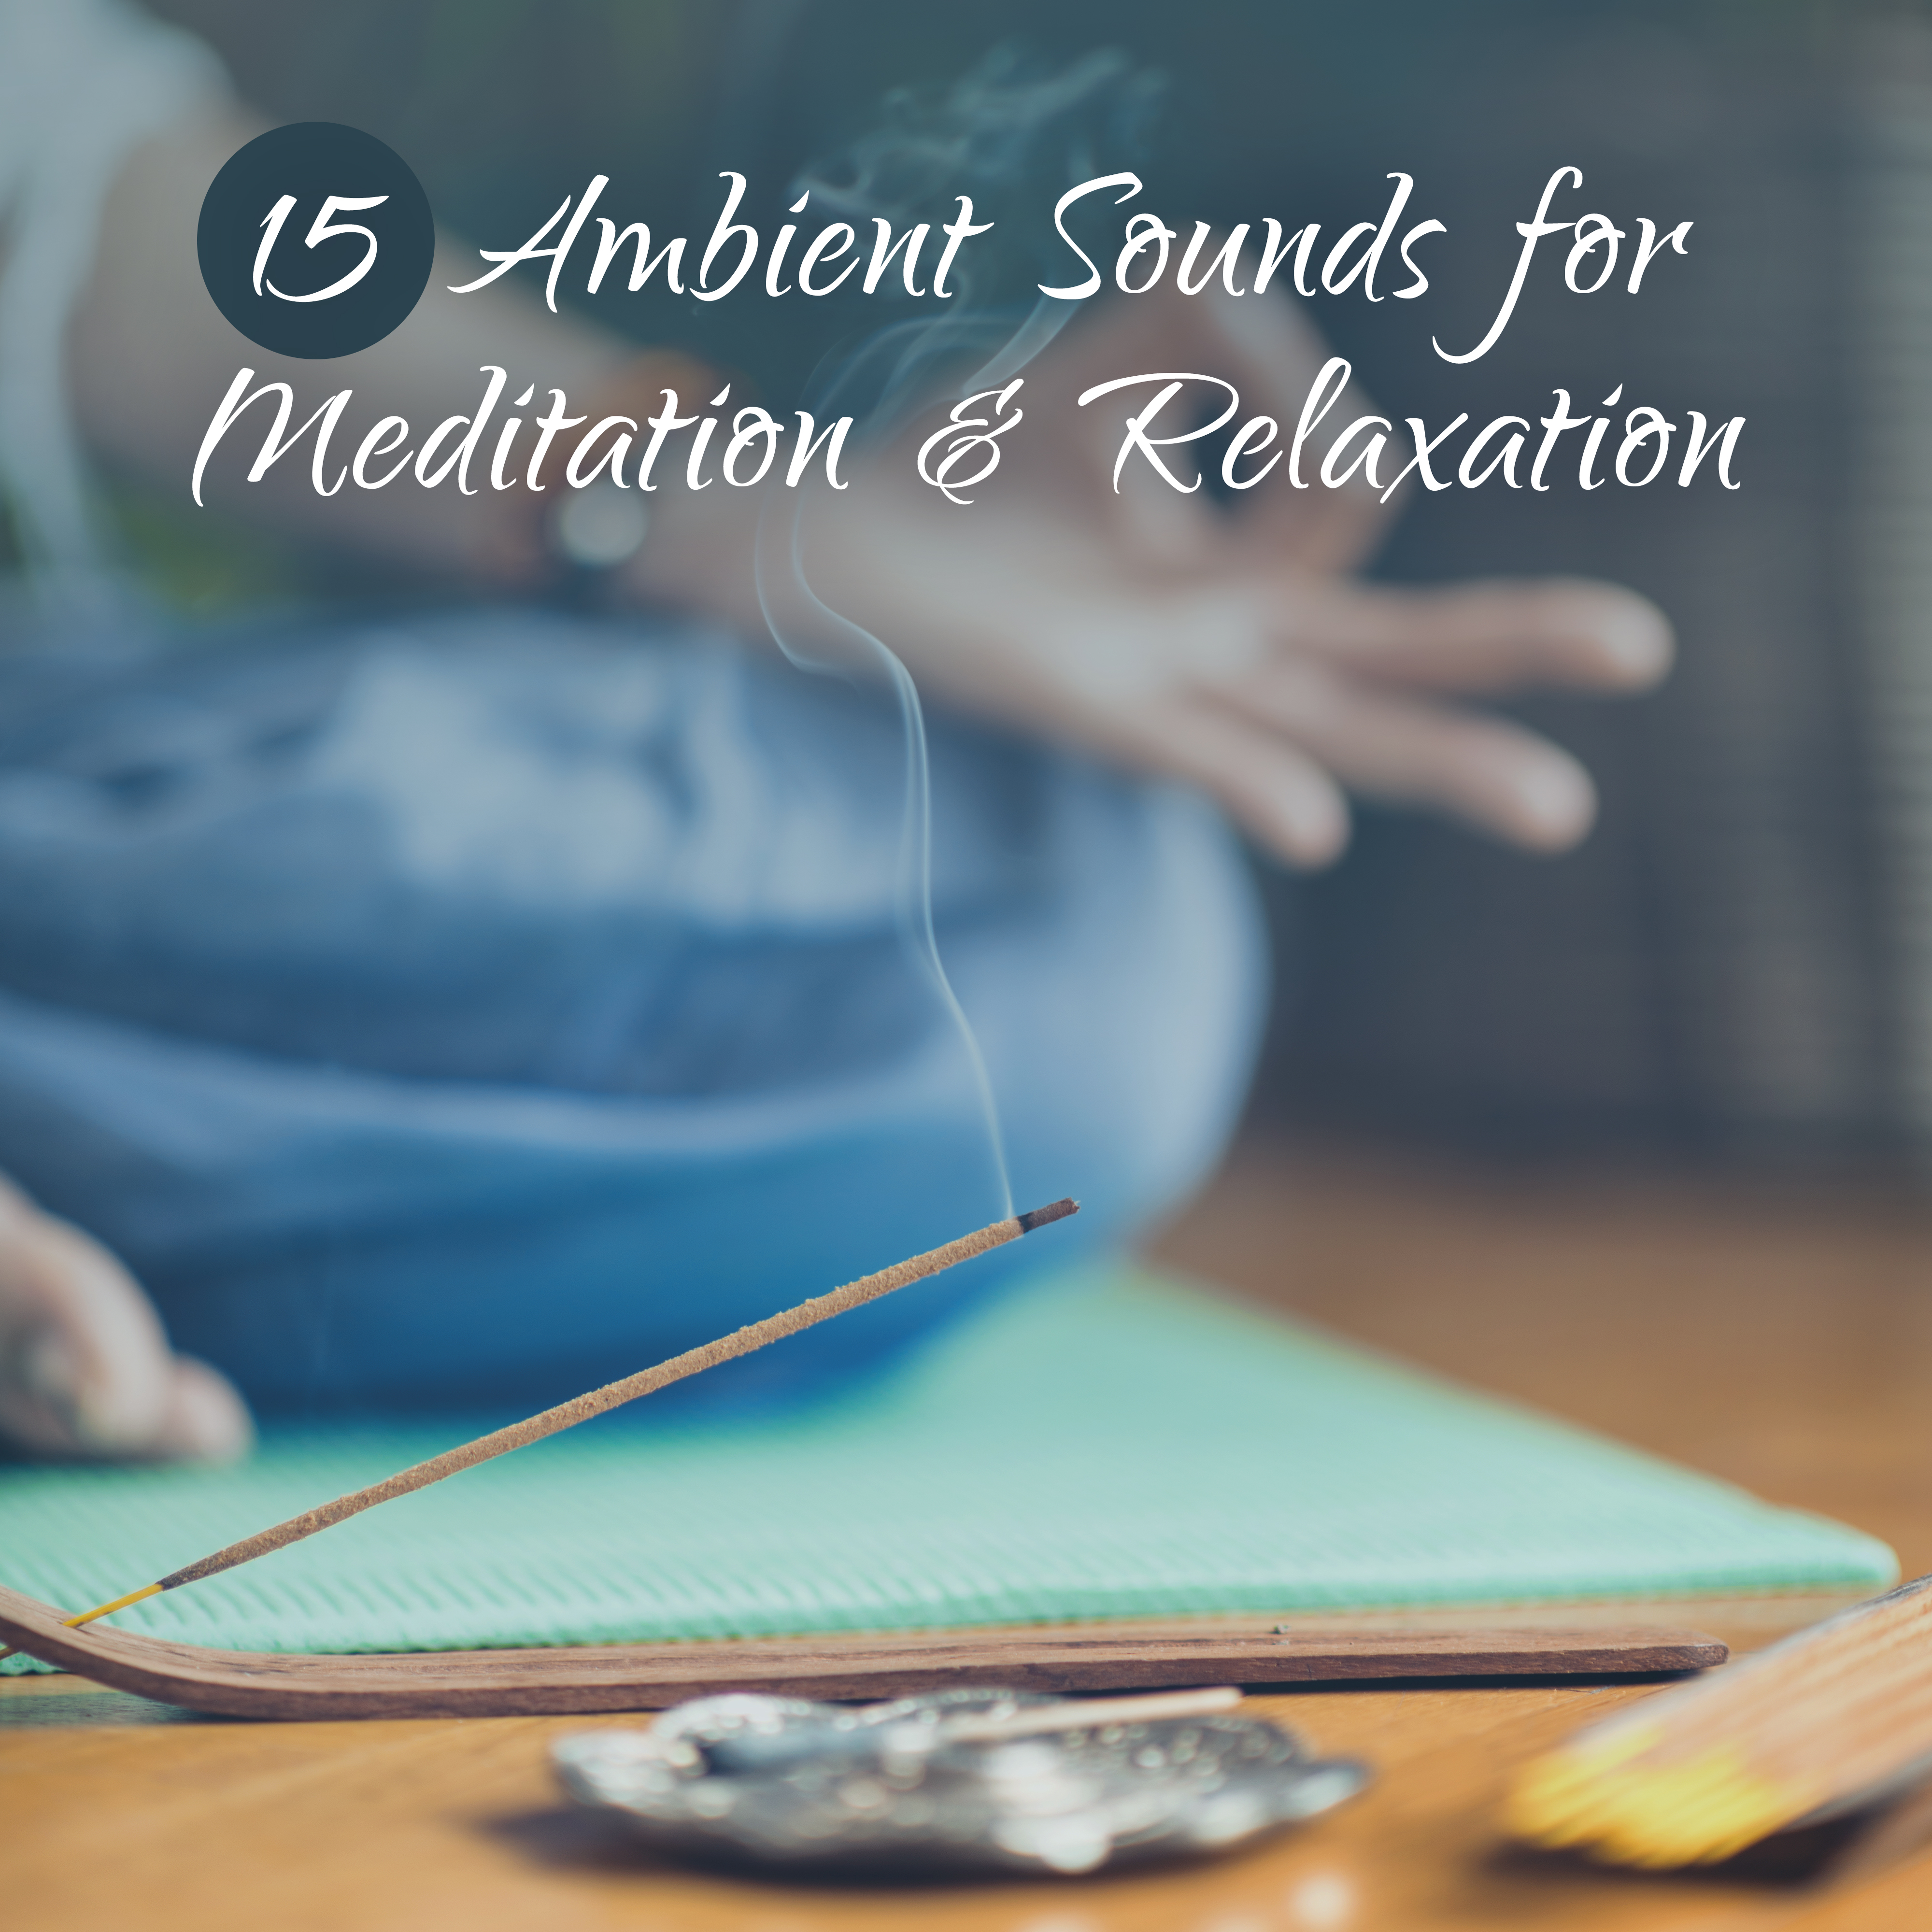 15 Ambient Sounds for Meditation  Relaxation  Pure Melodies to Calm Down, Relaxing Sleep, Deep Meditation, Yoga Relaxation, Asian Chillout Lounge